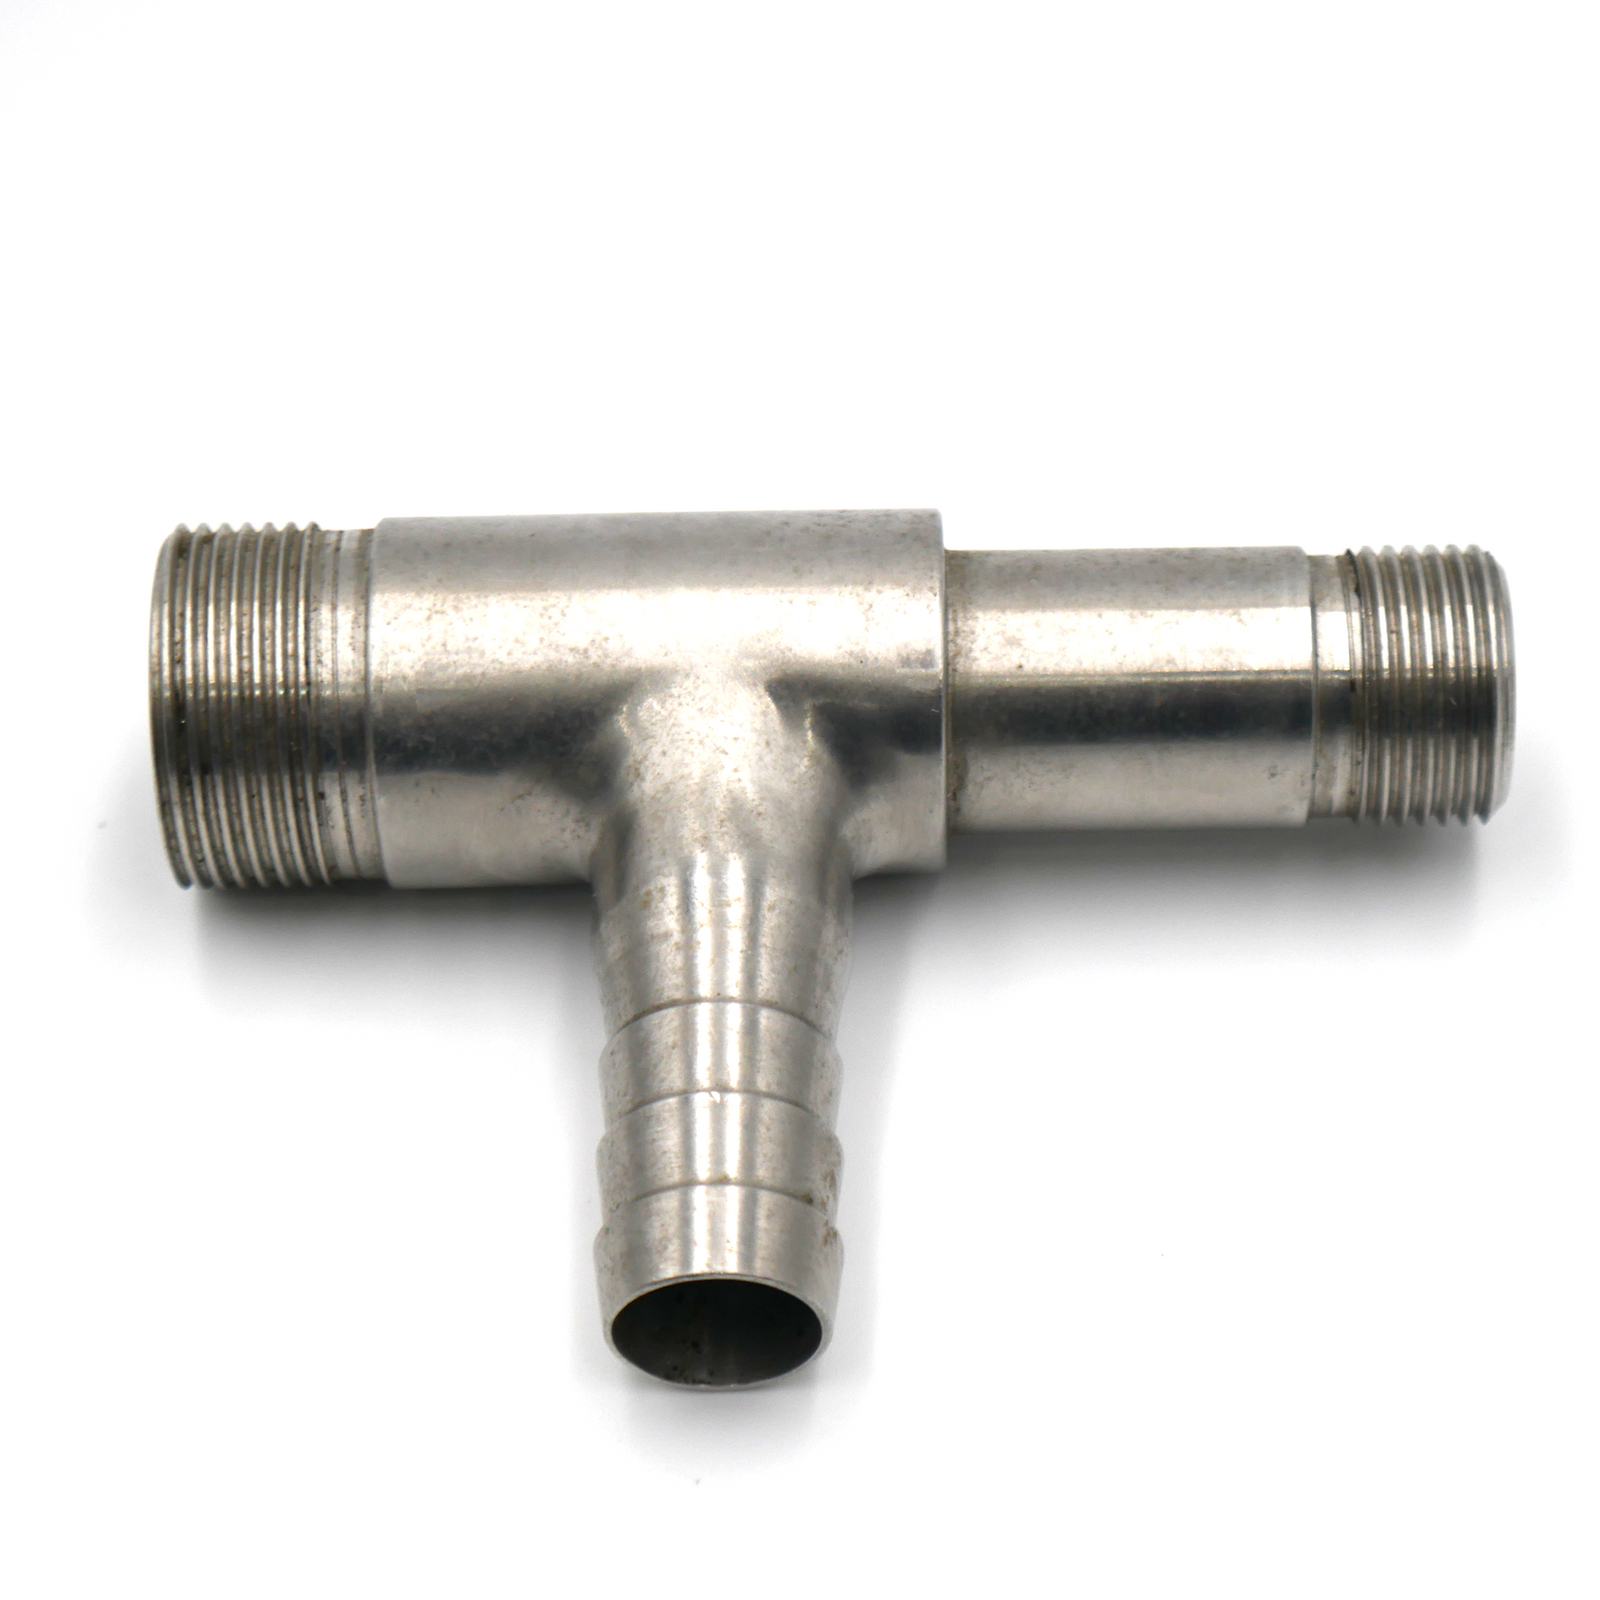 Type A nozzle body with barber hose connection